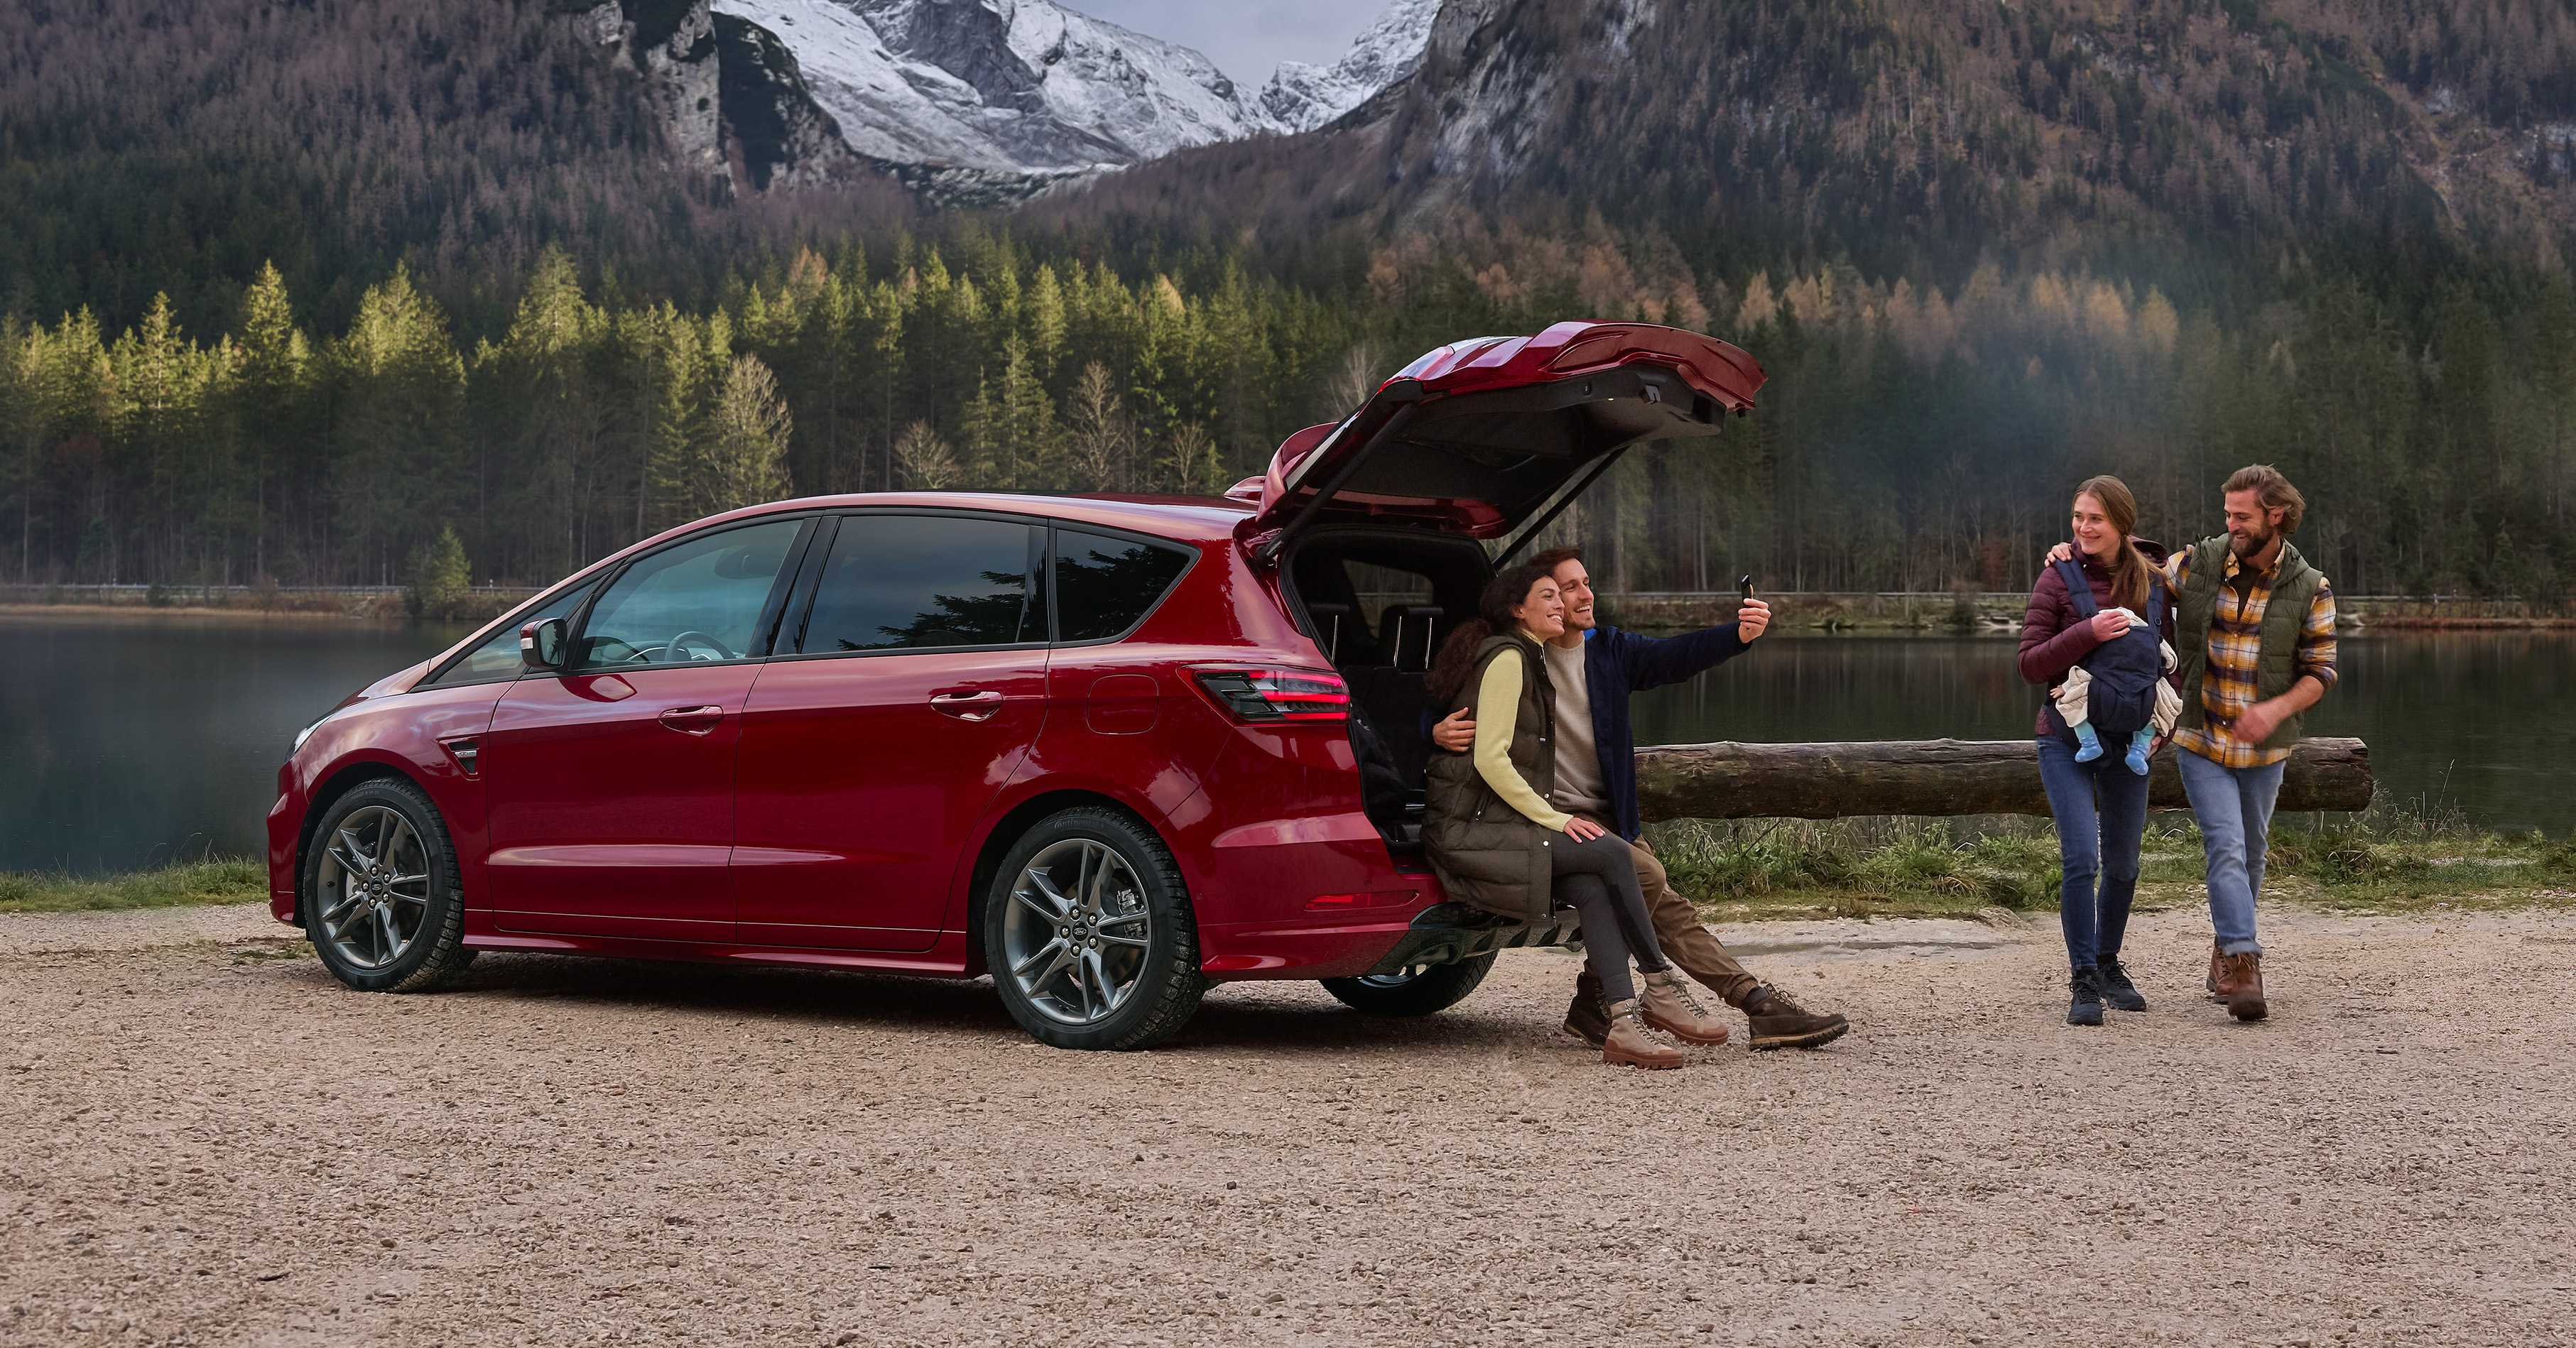 Ford Europe still believes in MPVs, updates S-Max and Galaxy